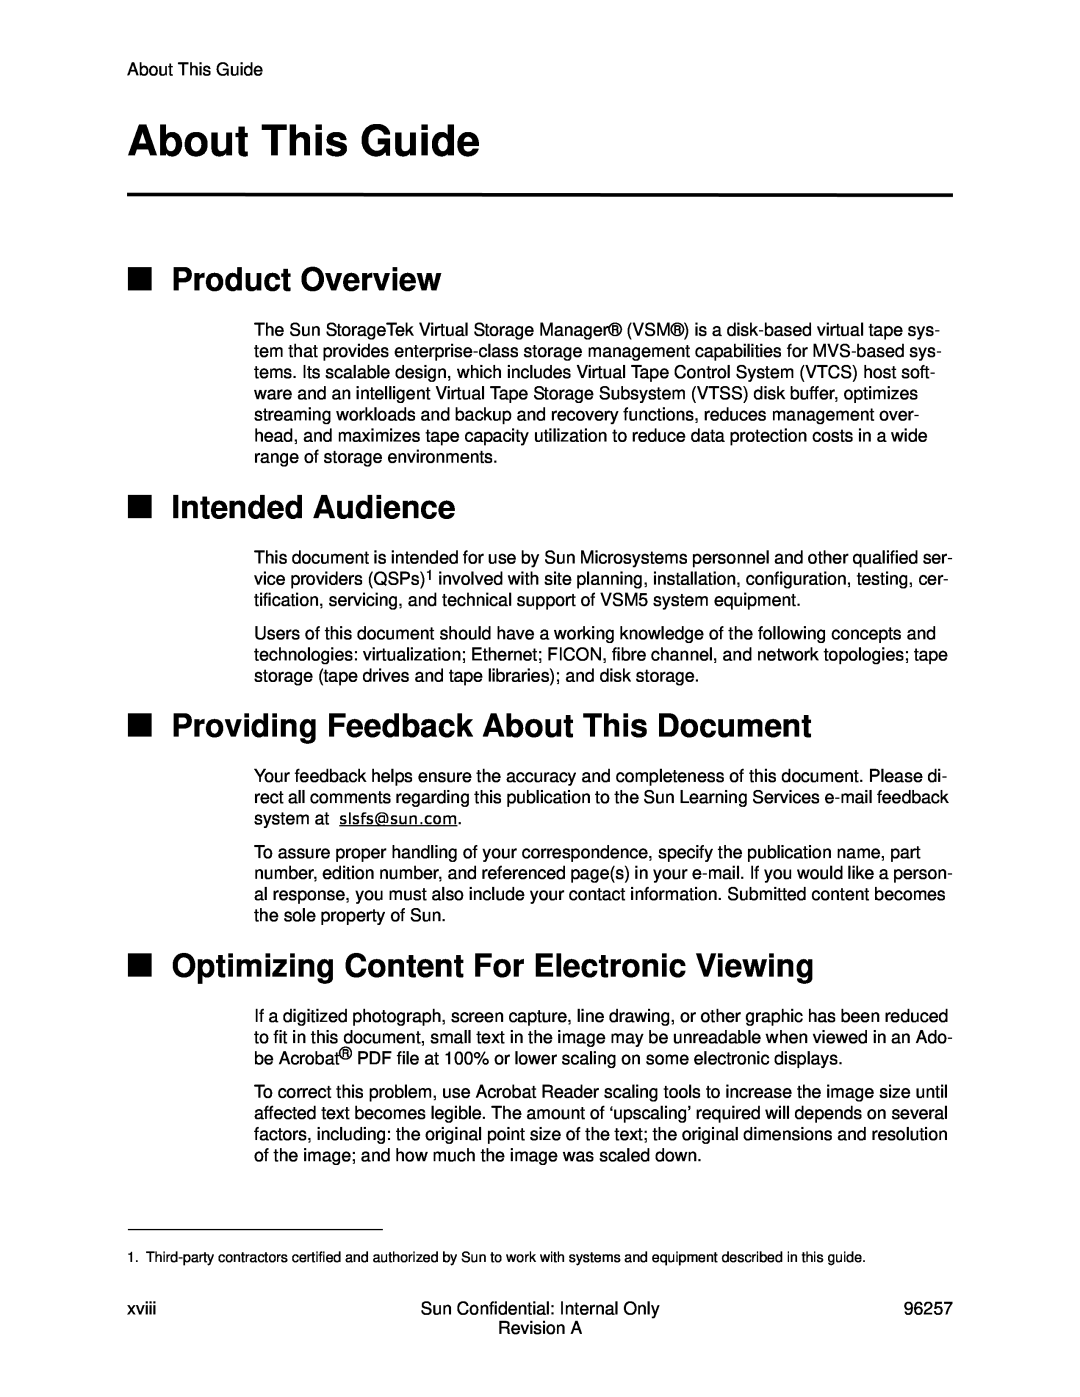 Sun Microsystems 96257 manual About This Guide, Product Overview, Intended Audience, Providing Feedback About This Document 